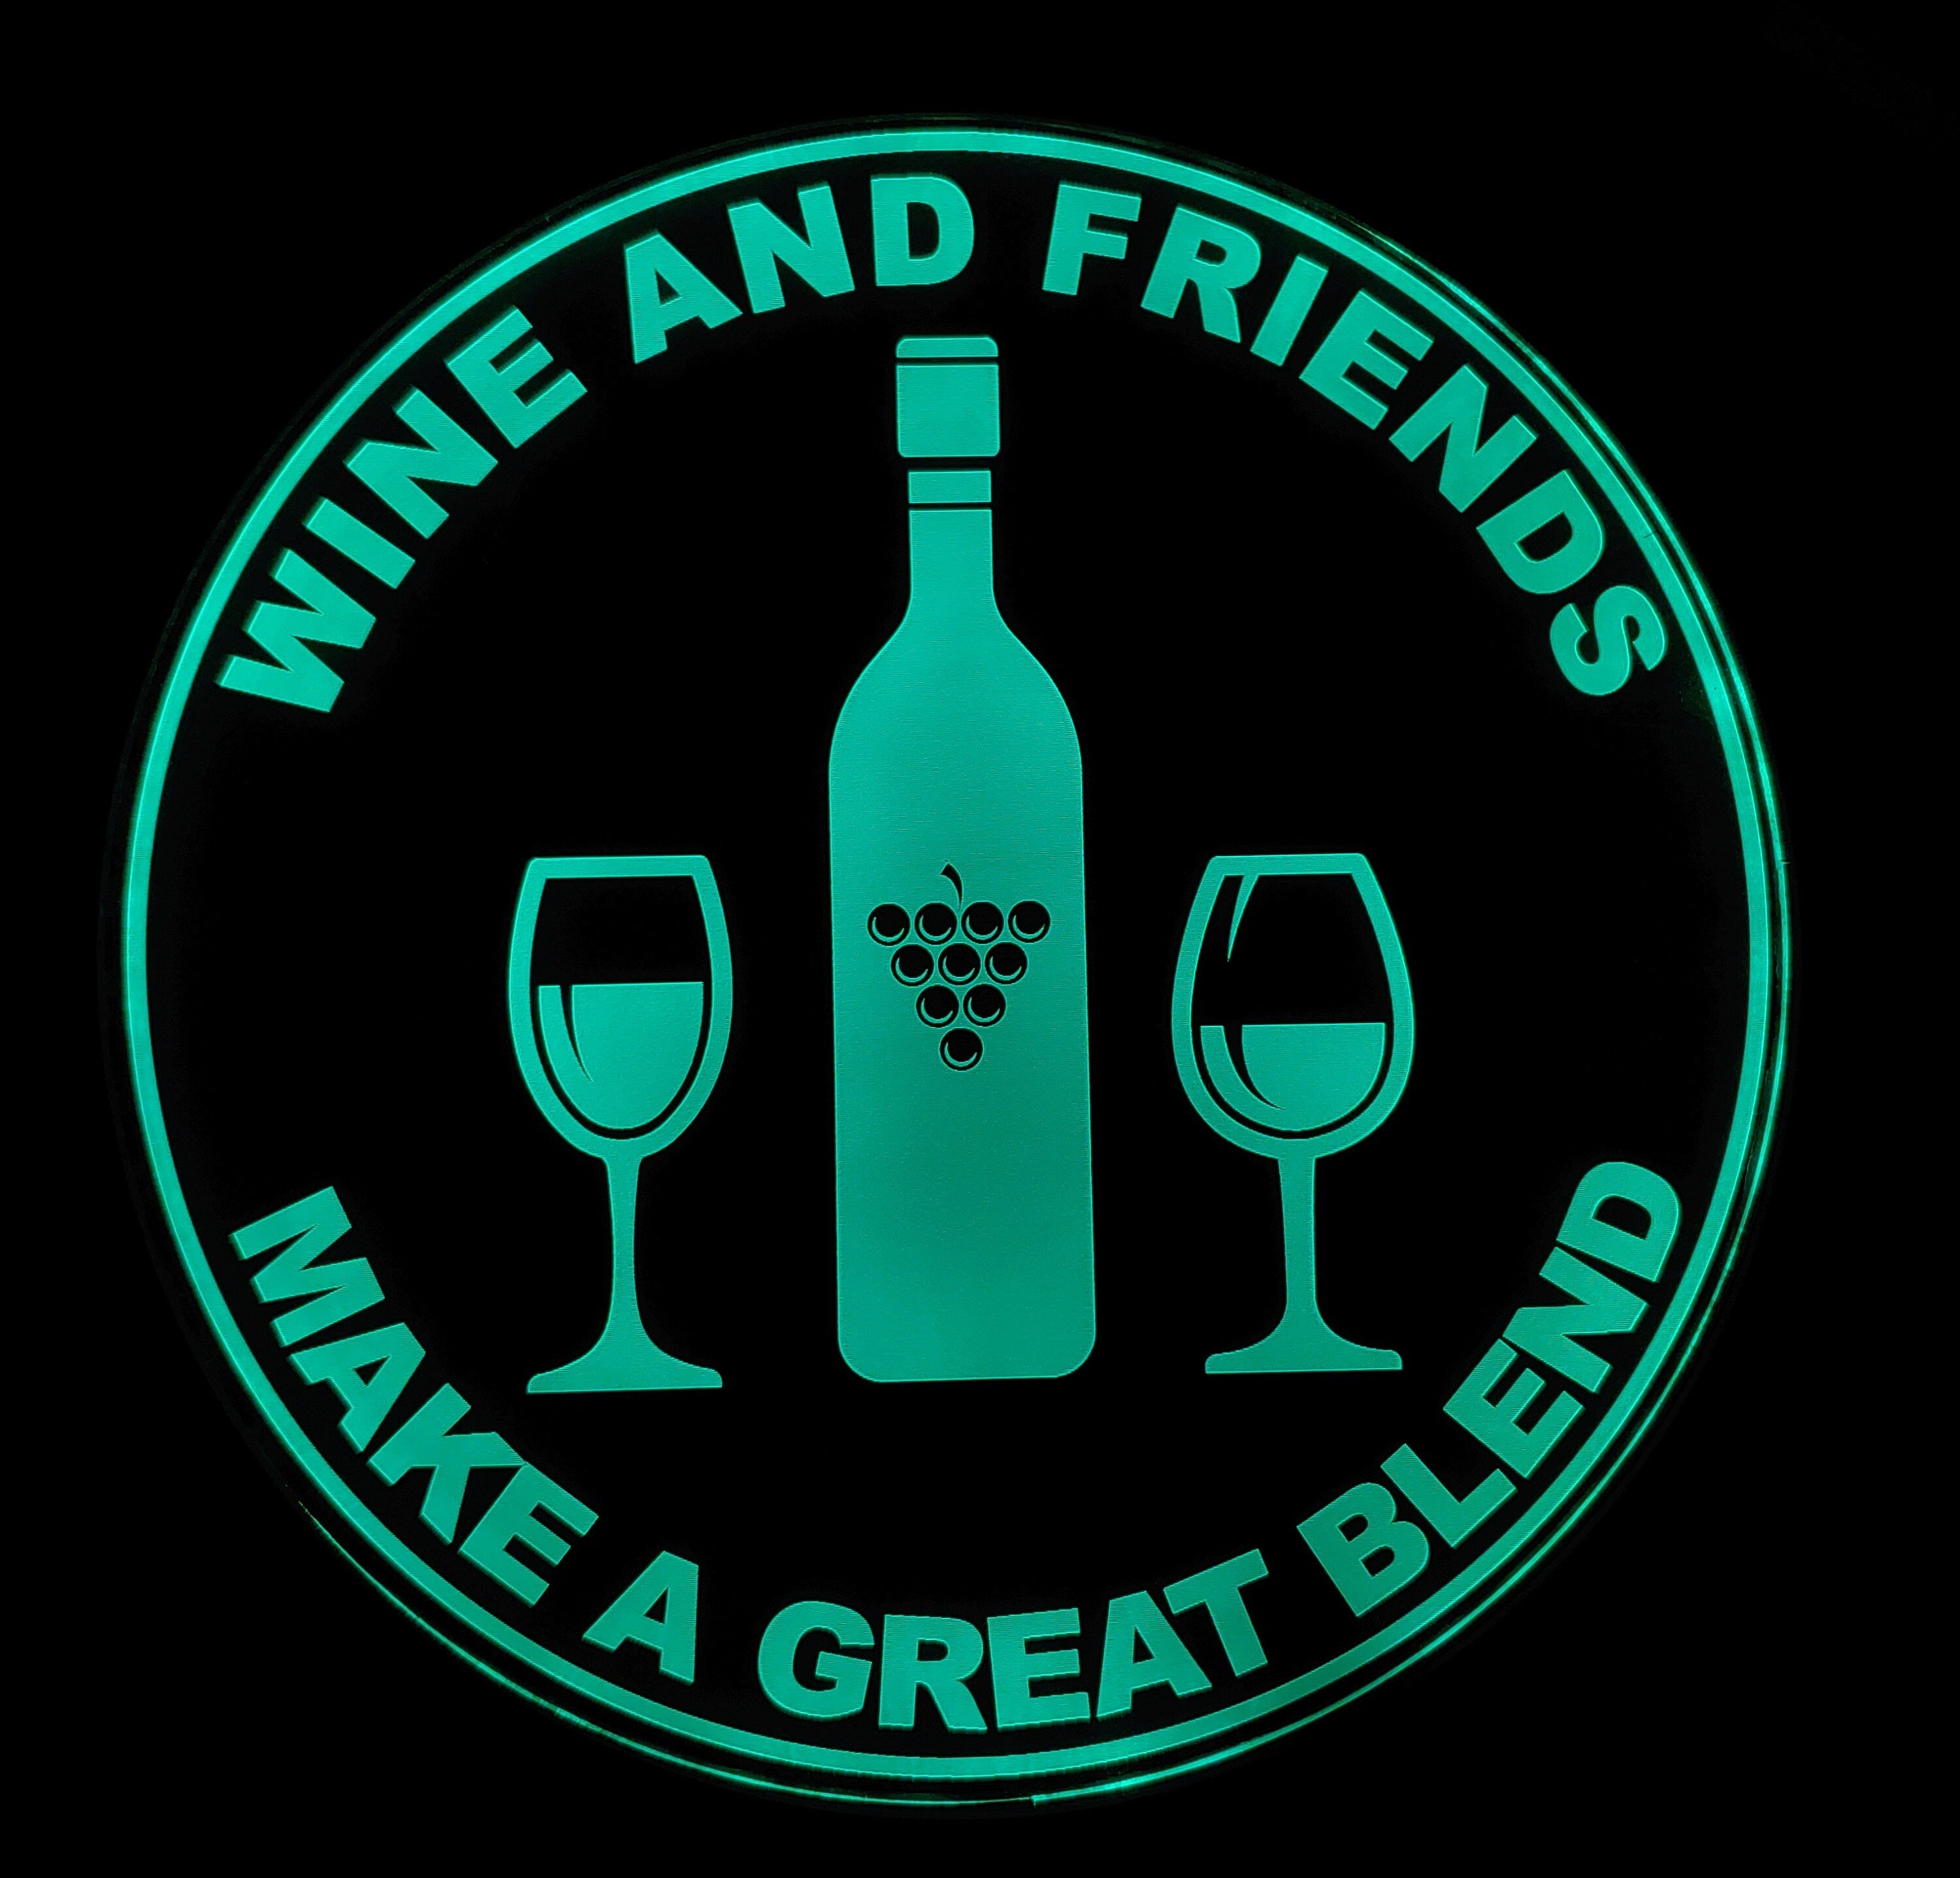 Wine and Friends LED Wall Sign Neon Like - Color Changing Remote Control - 4 Sizes Made in USA Free Shipping